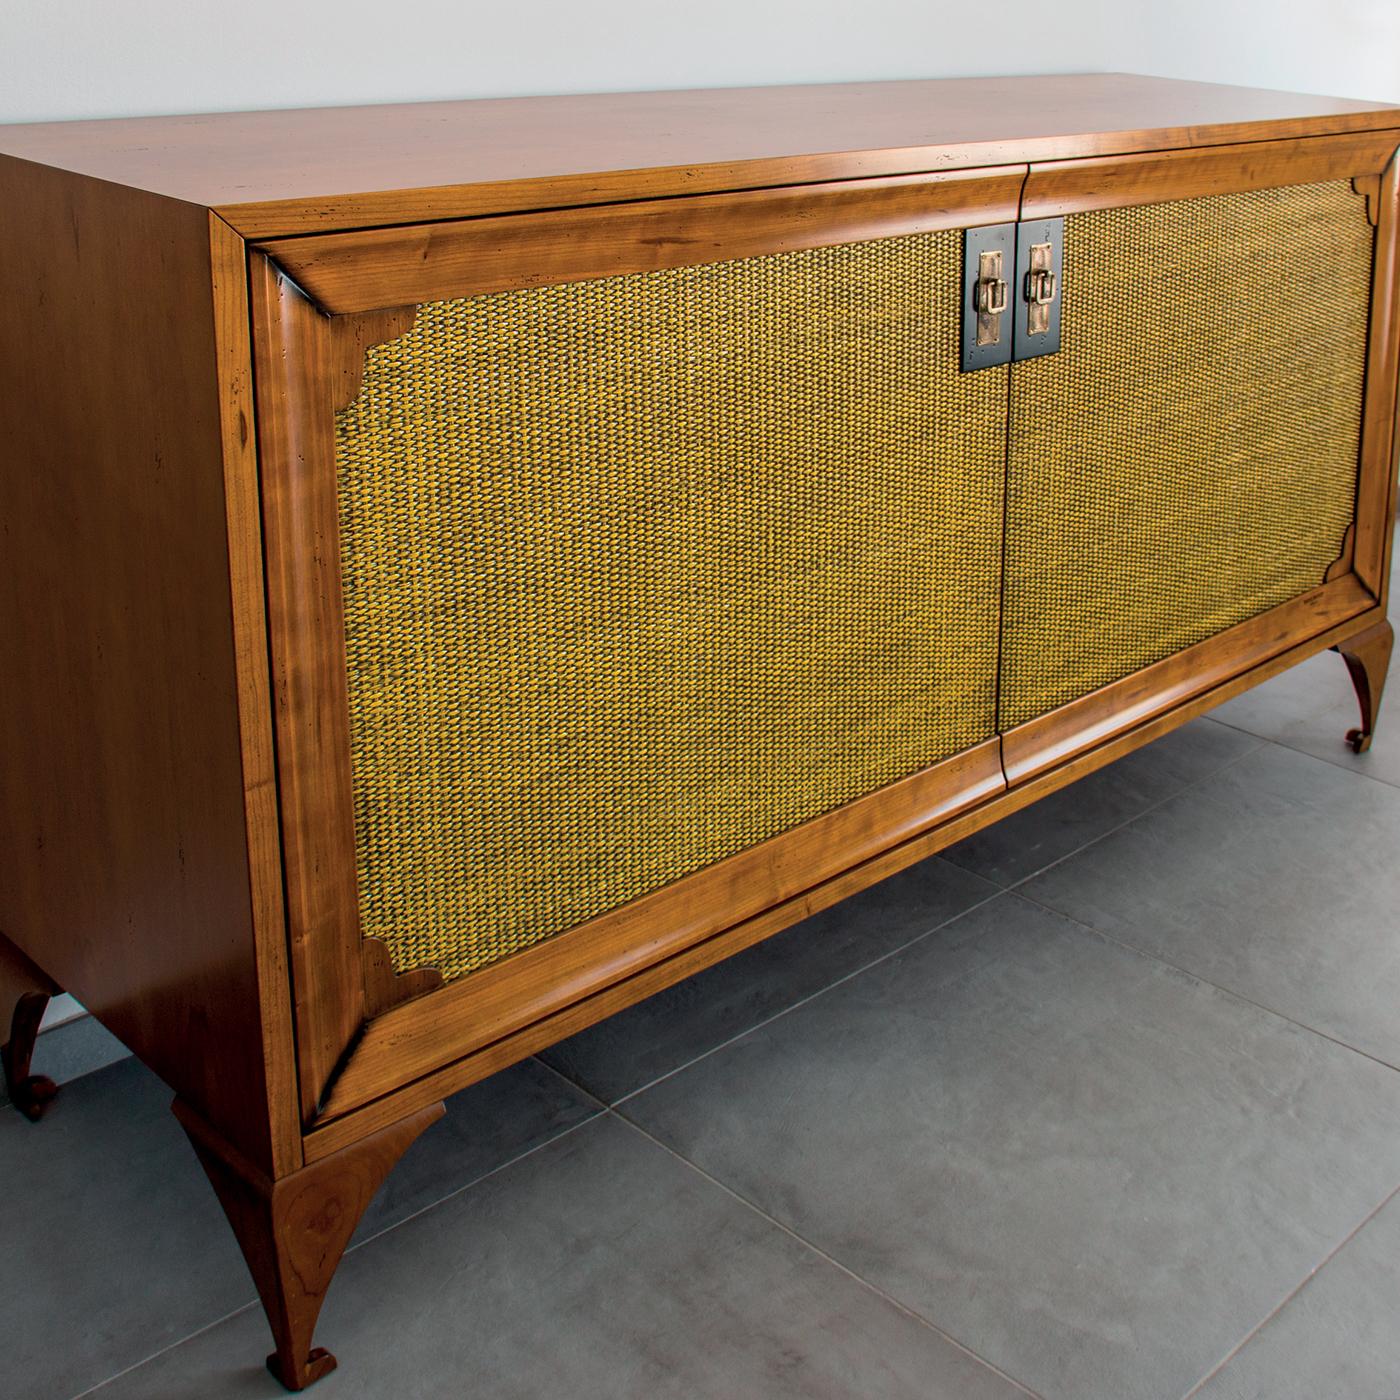 This sideboard is exquisitely crafted of solid cherrywood, and enriched on the two door-panels with a pale yellow canette piqué fabric with a lovely ribbed texture. The internal storage features drawers and two shelves on each side, allowing for